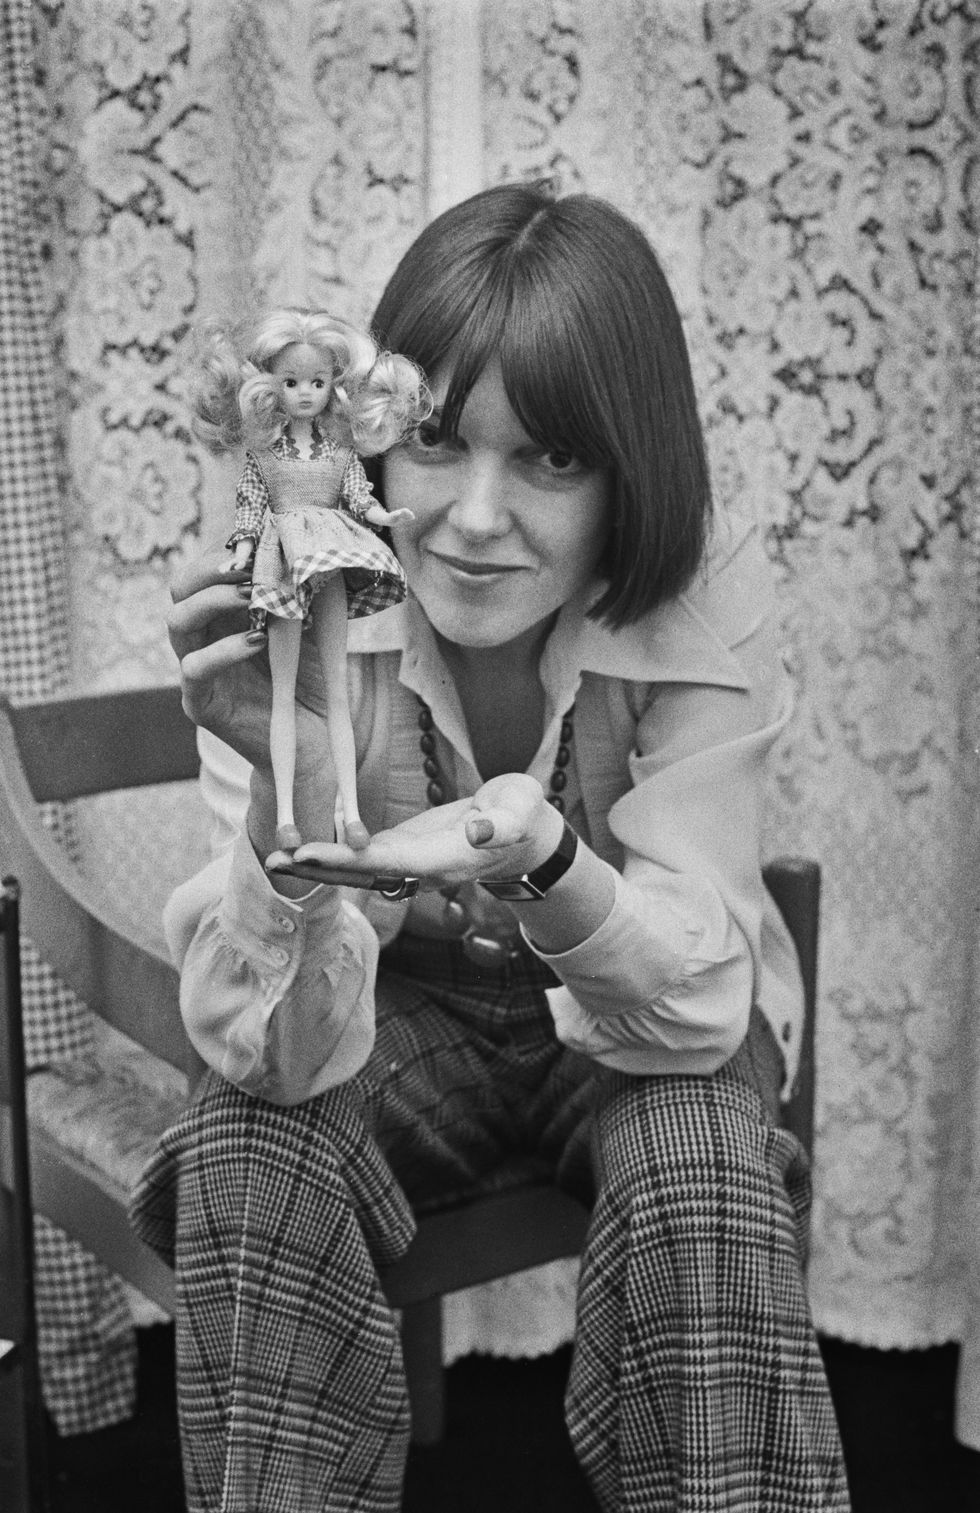 british fashion designer mary quant at the launch of the new doll daisy, uk, 14th january 1973 the doll's wardrobe was designed by quant, and the name reflects her fashion logo, a daisy flower photo by evening standardhulton archivegetty images